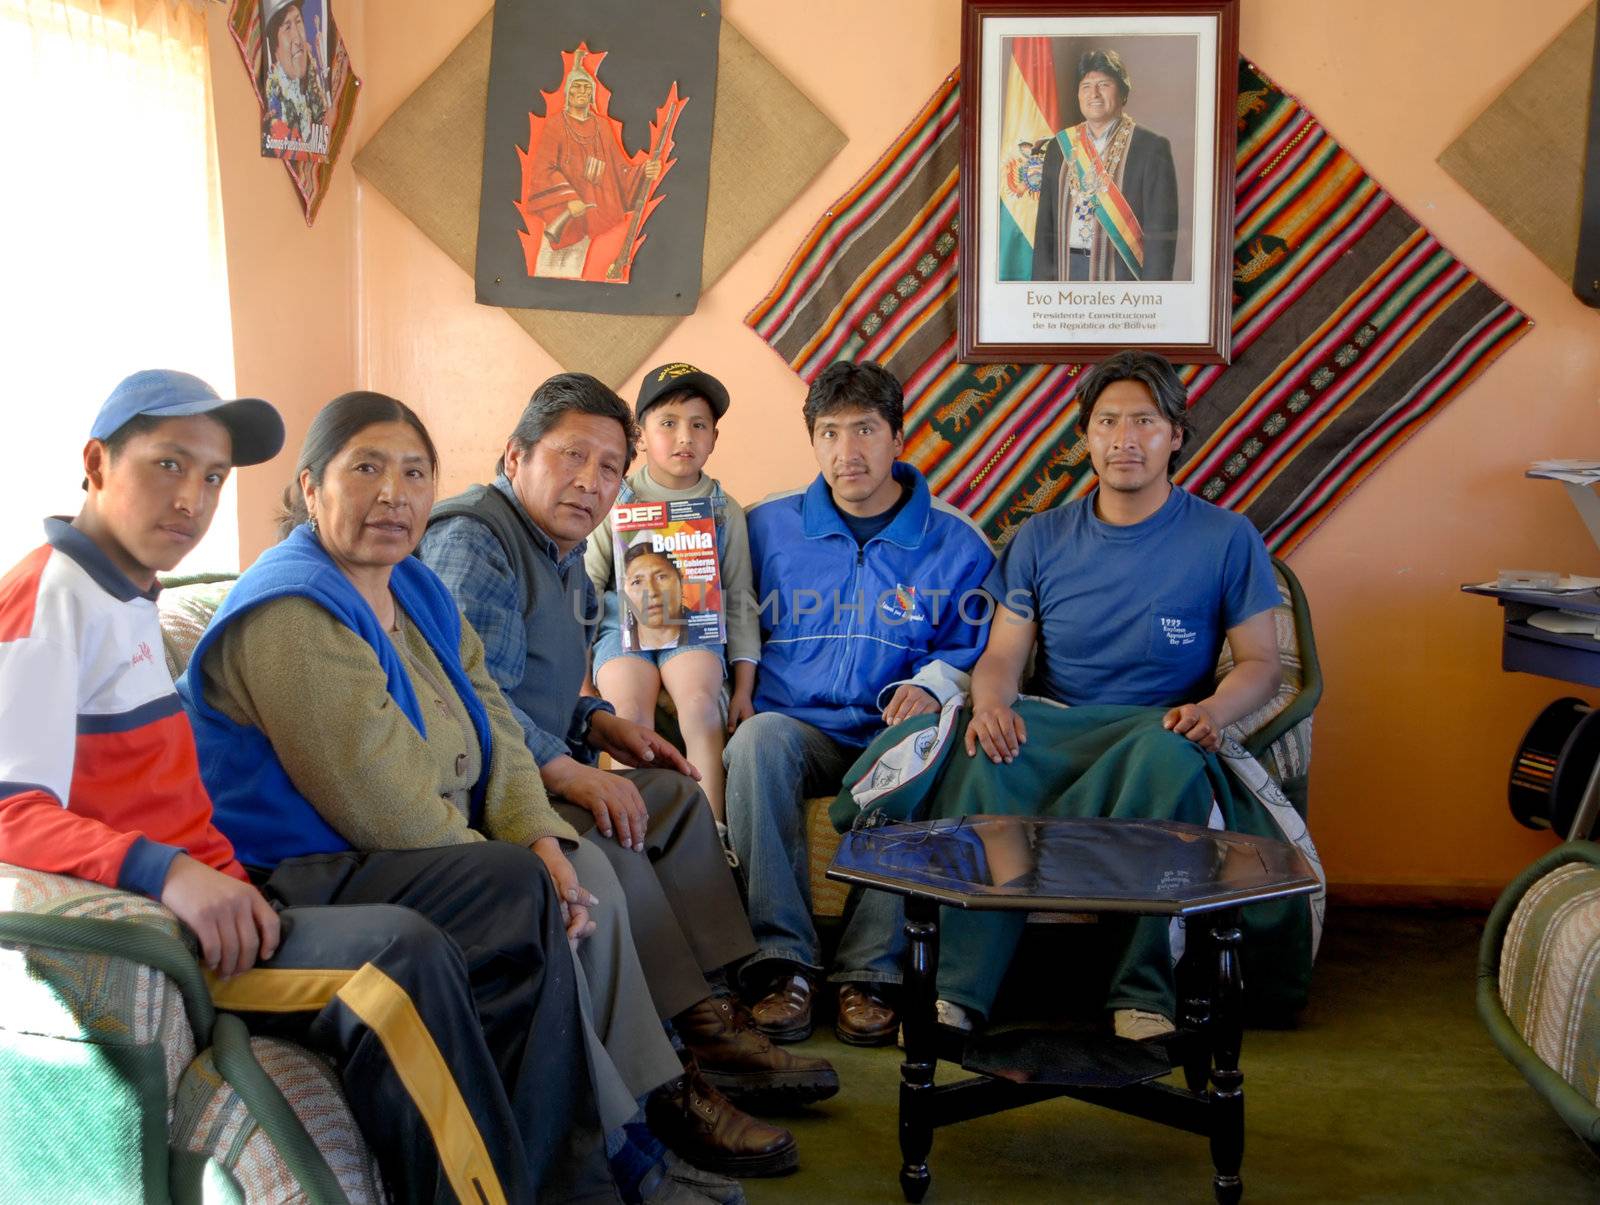 Oruro, Bolivia, June 14, 2006. Esther Morales sister of the President of Bolivia Evo Morales.Esther and her children and grandchildren at their home in Oruro